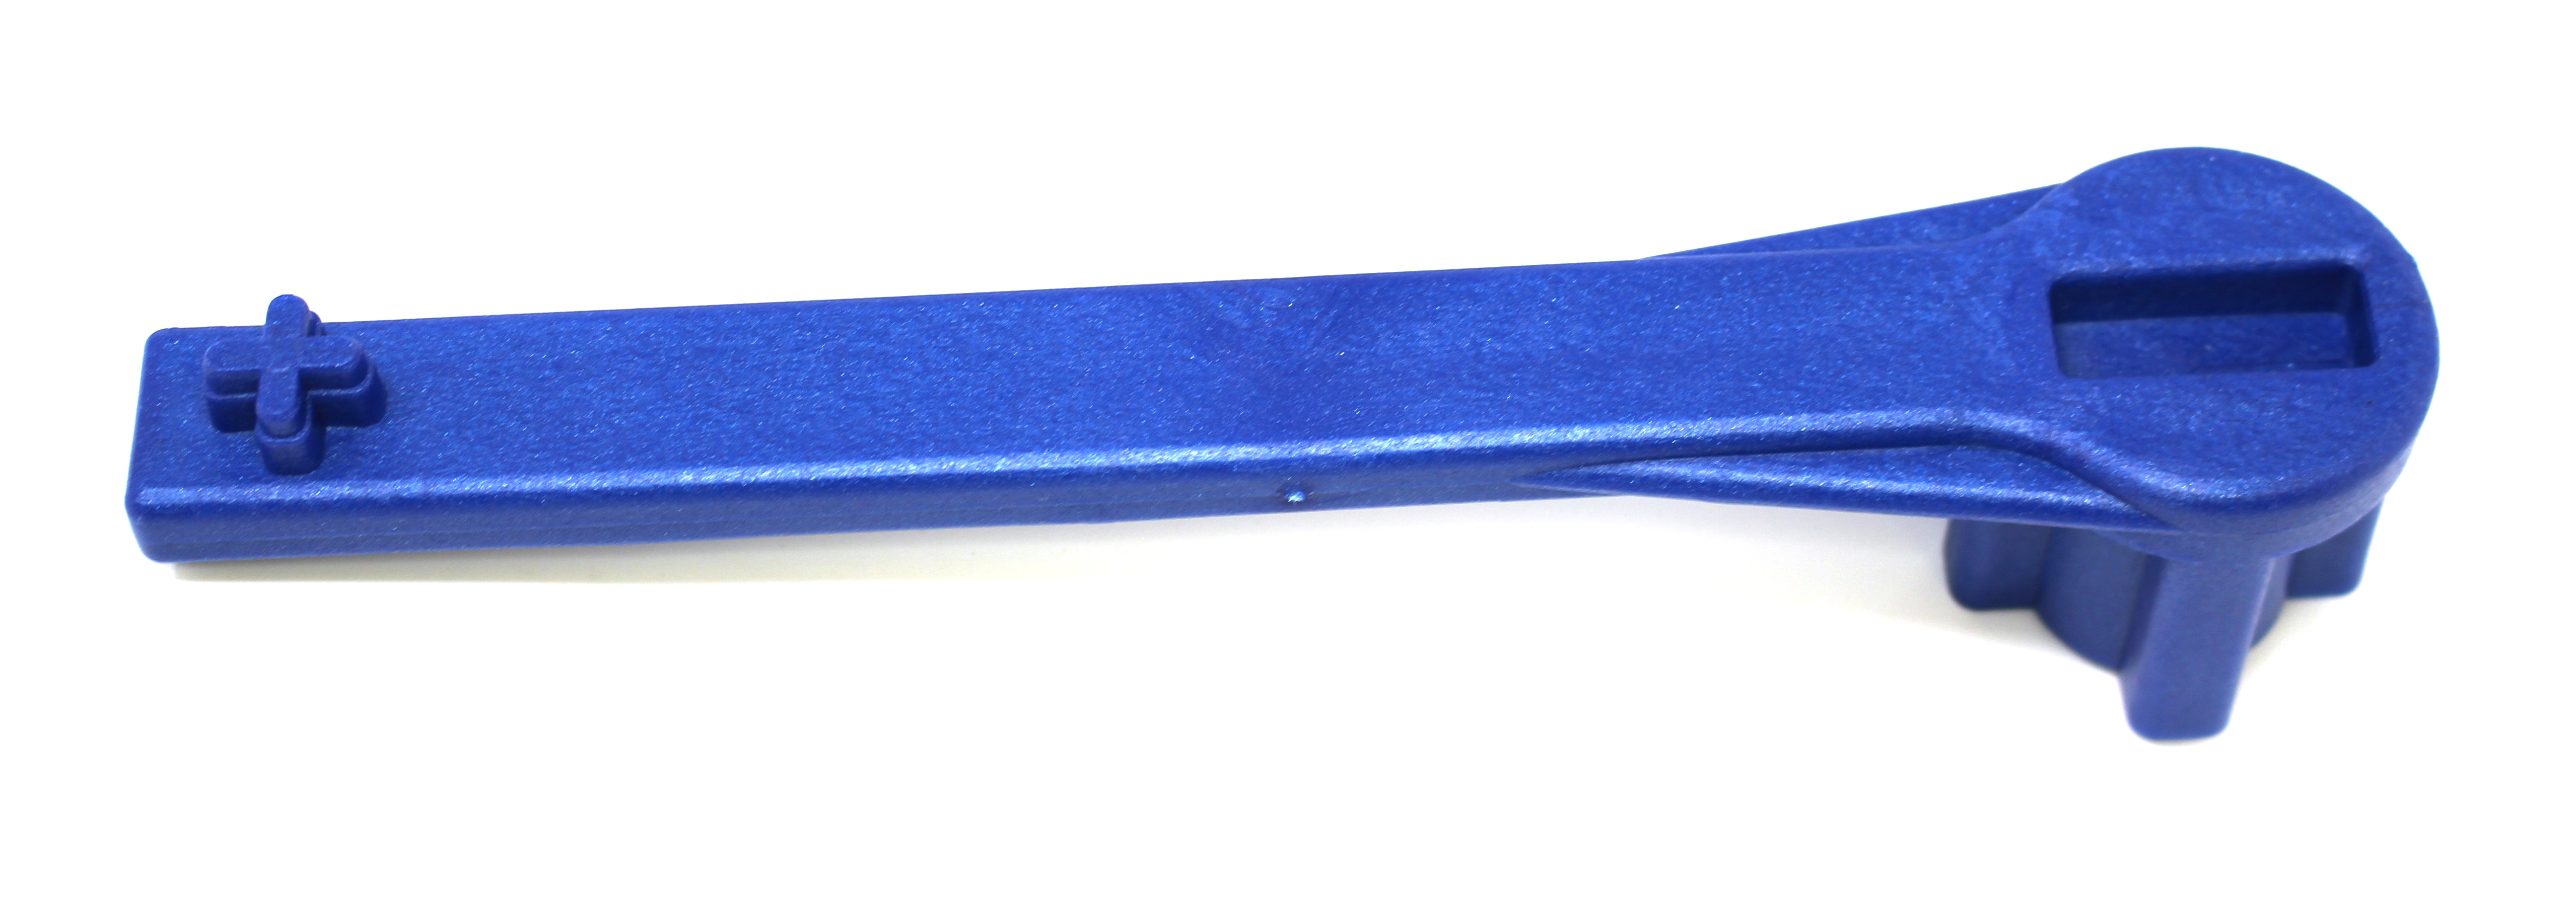 Gas and Bung Wrench Non Sparking Solid Drum Bung Nut Wrench (BLUE) 2 Pack - image 4 of 9